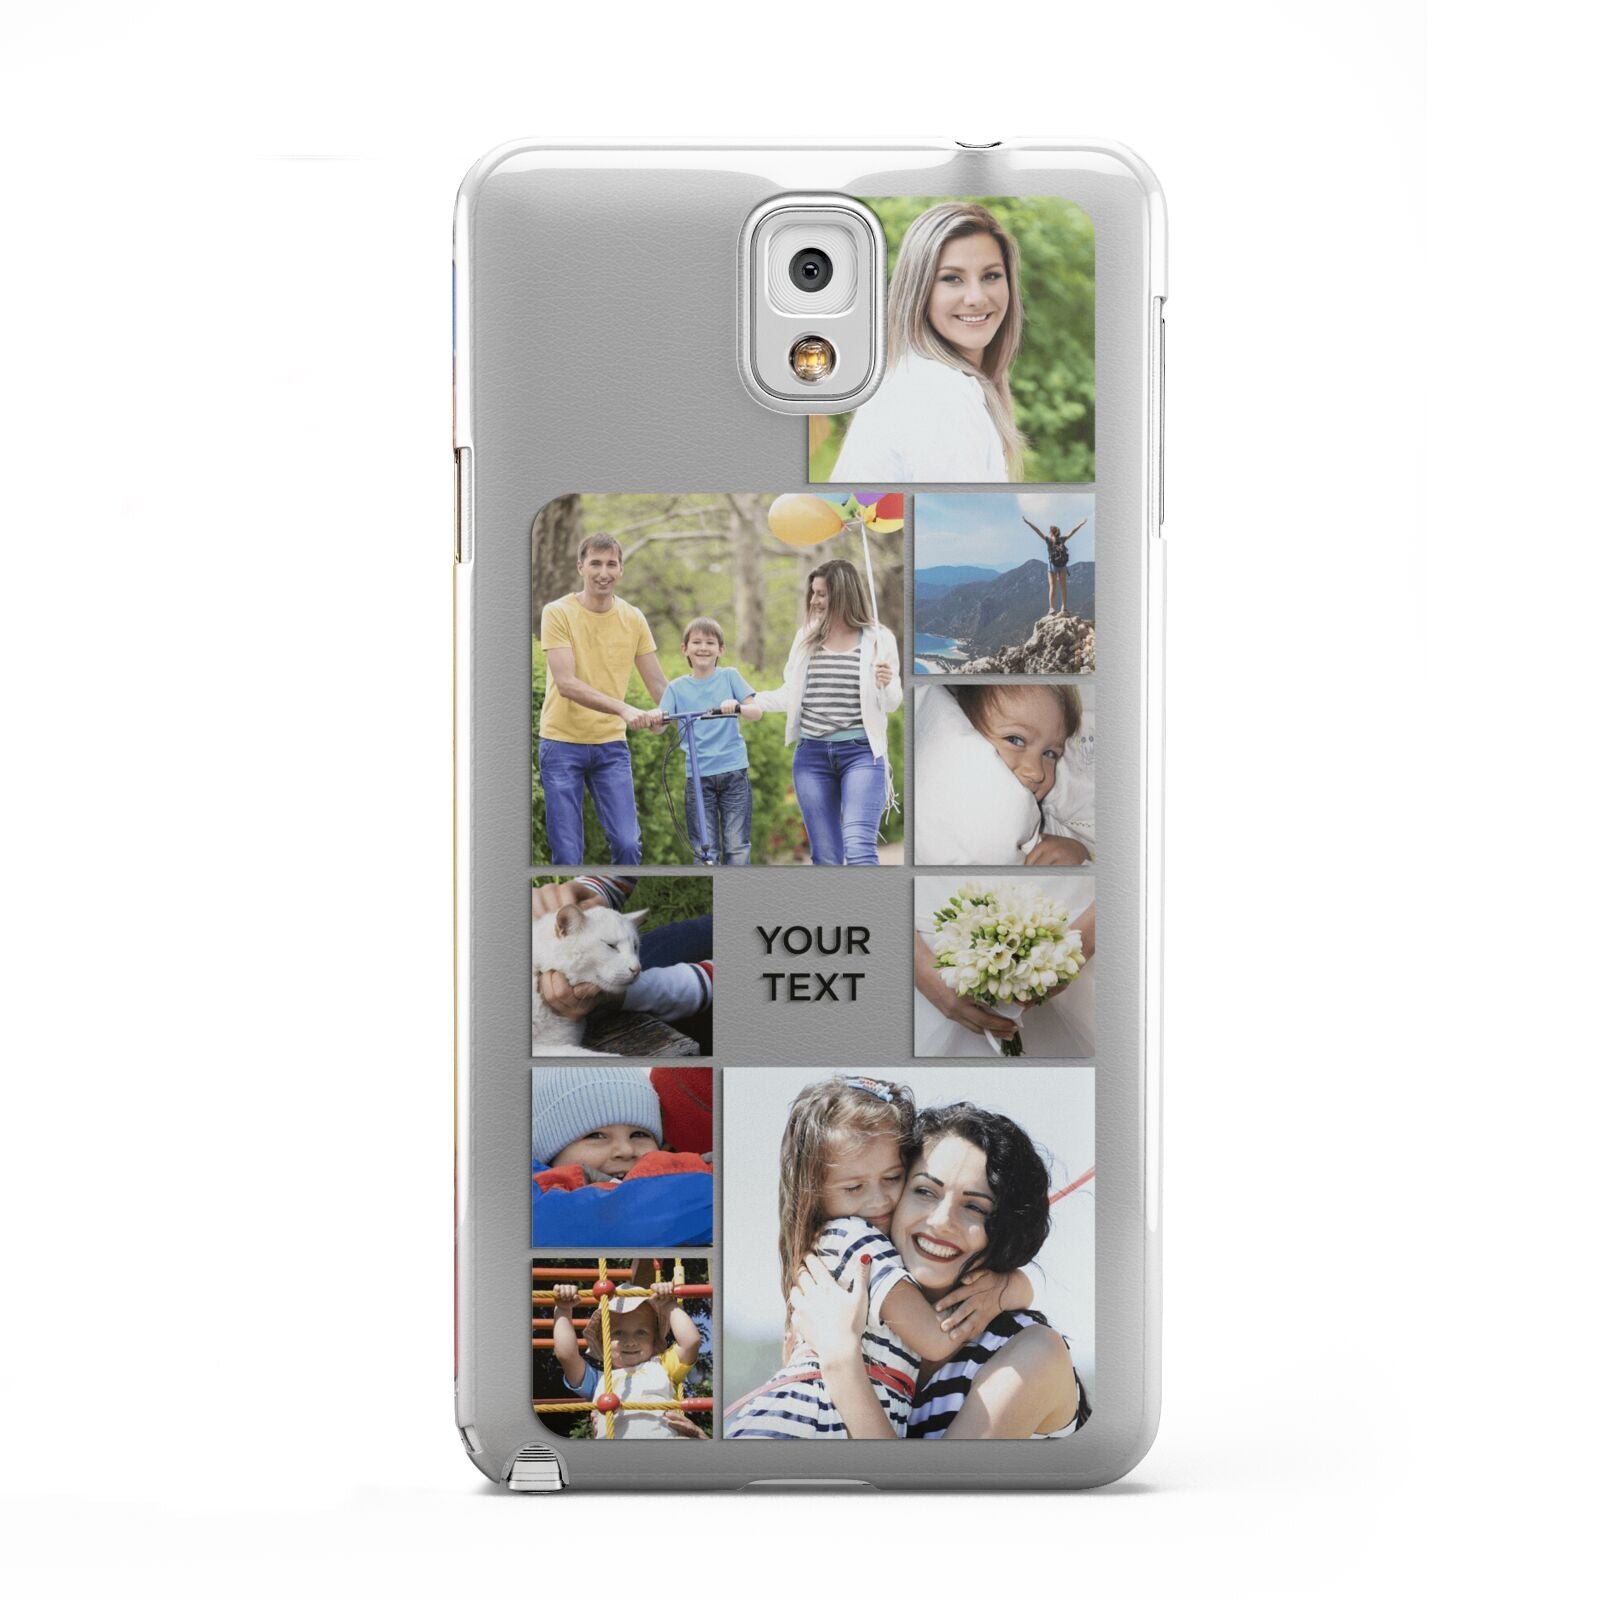 Personalised Photo Grid Samsung Galaxy Note 3 Case